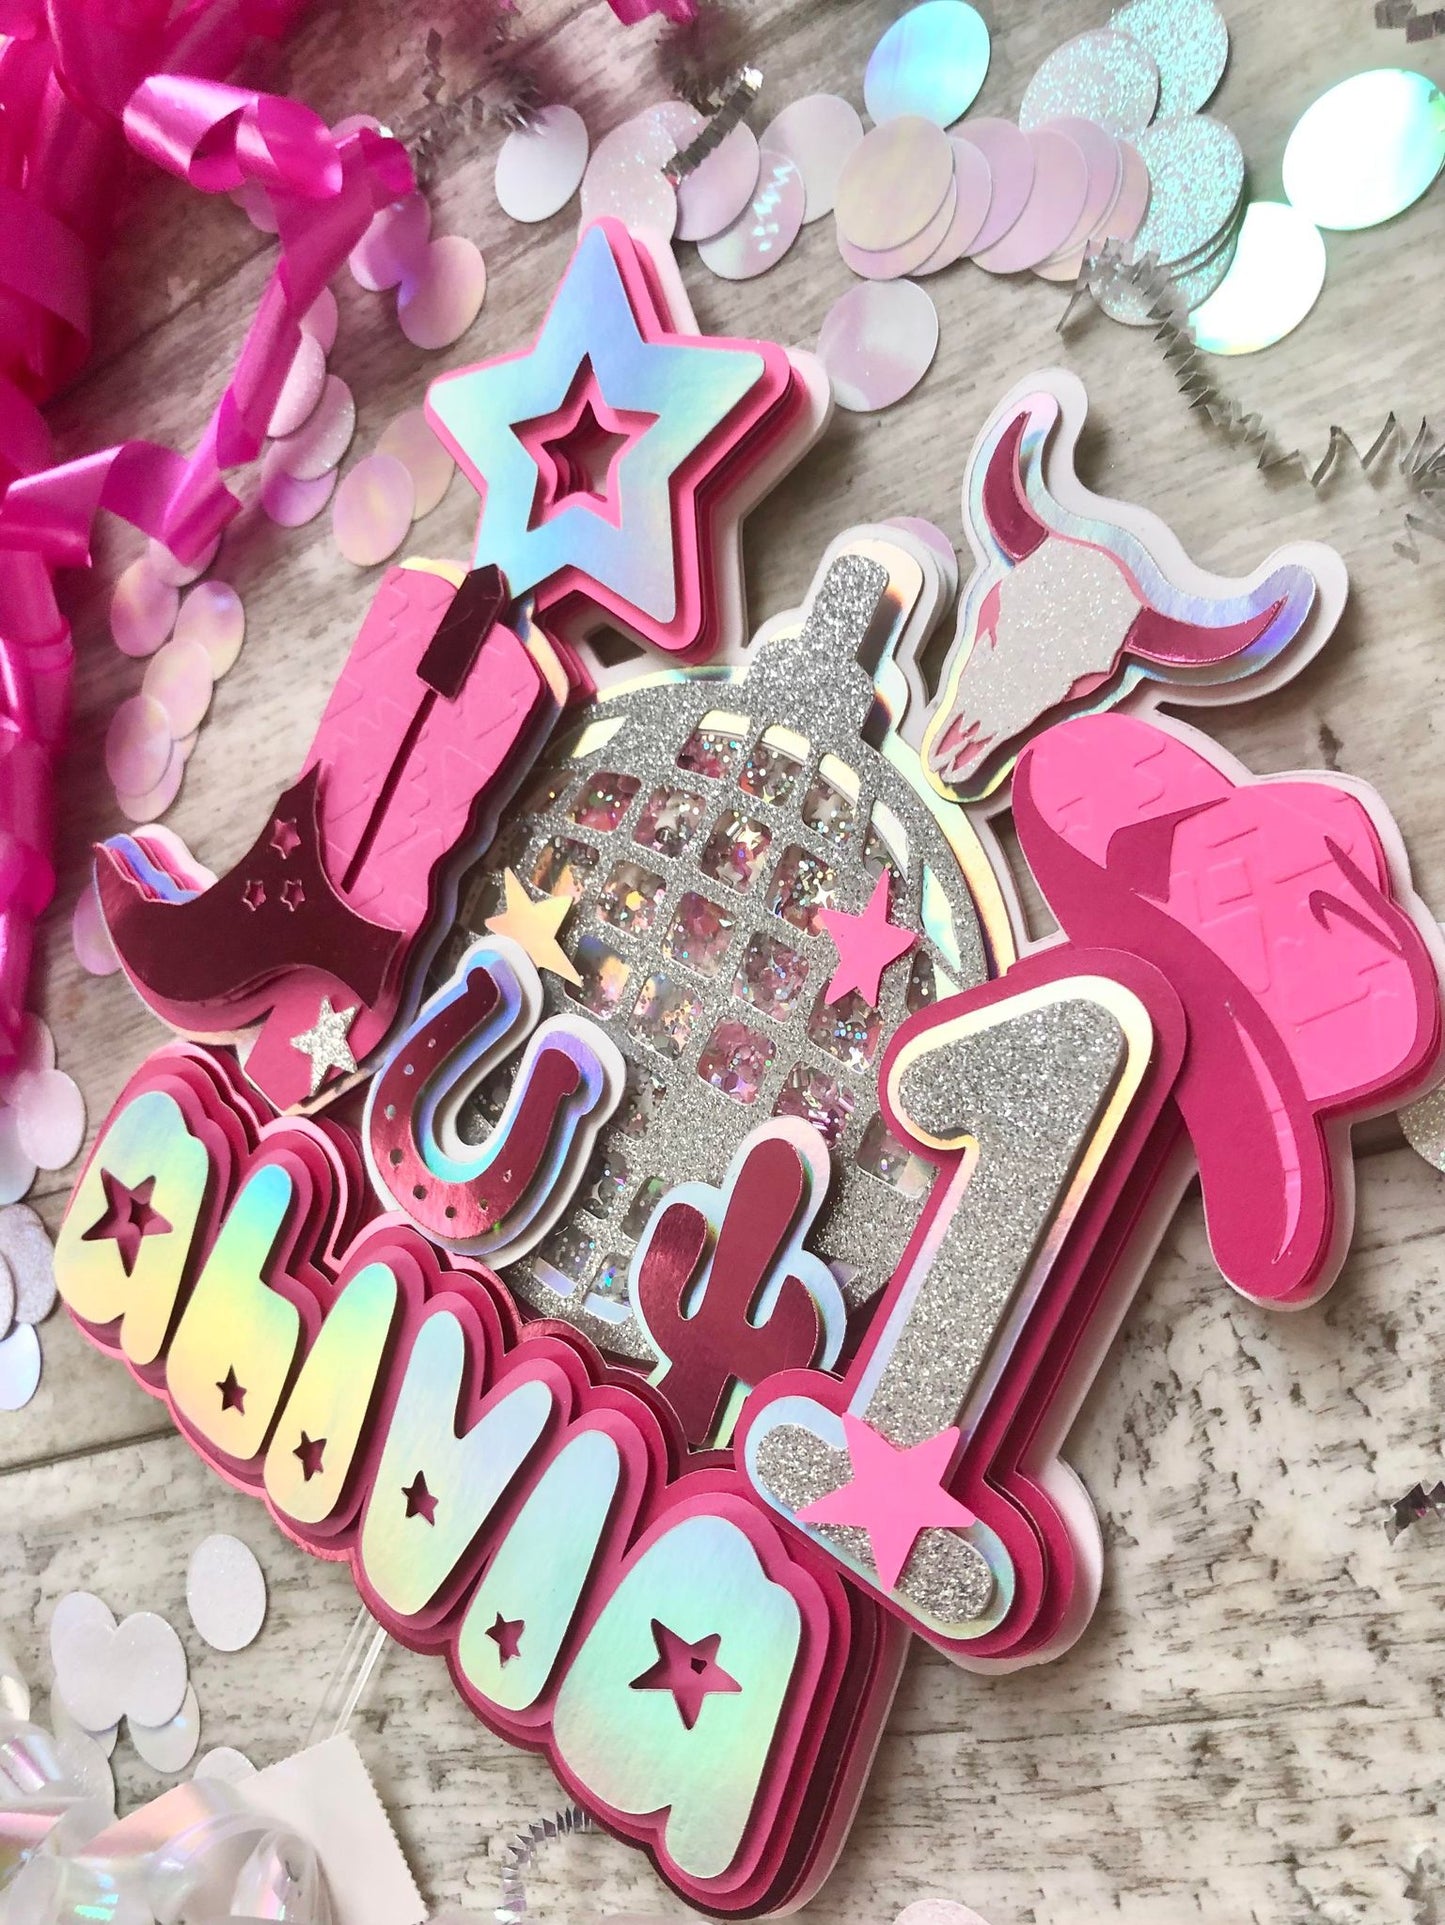 Let's Go Girls Space Cowgirl Disco Cow Girl Silver Pink Boot Cow Horseshoe Glitter Shaker Cake Topper